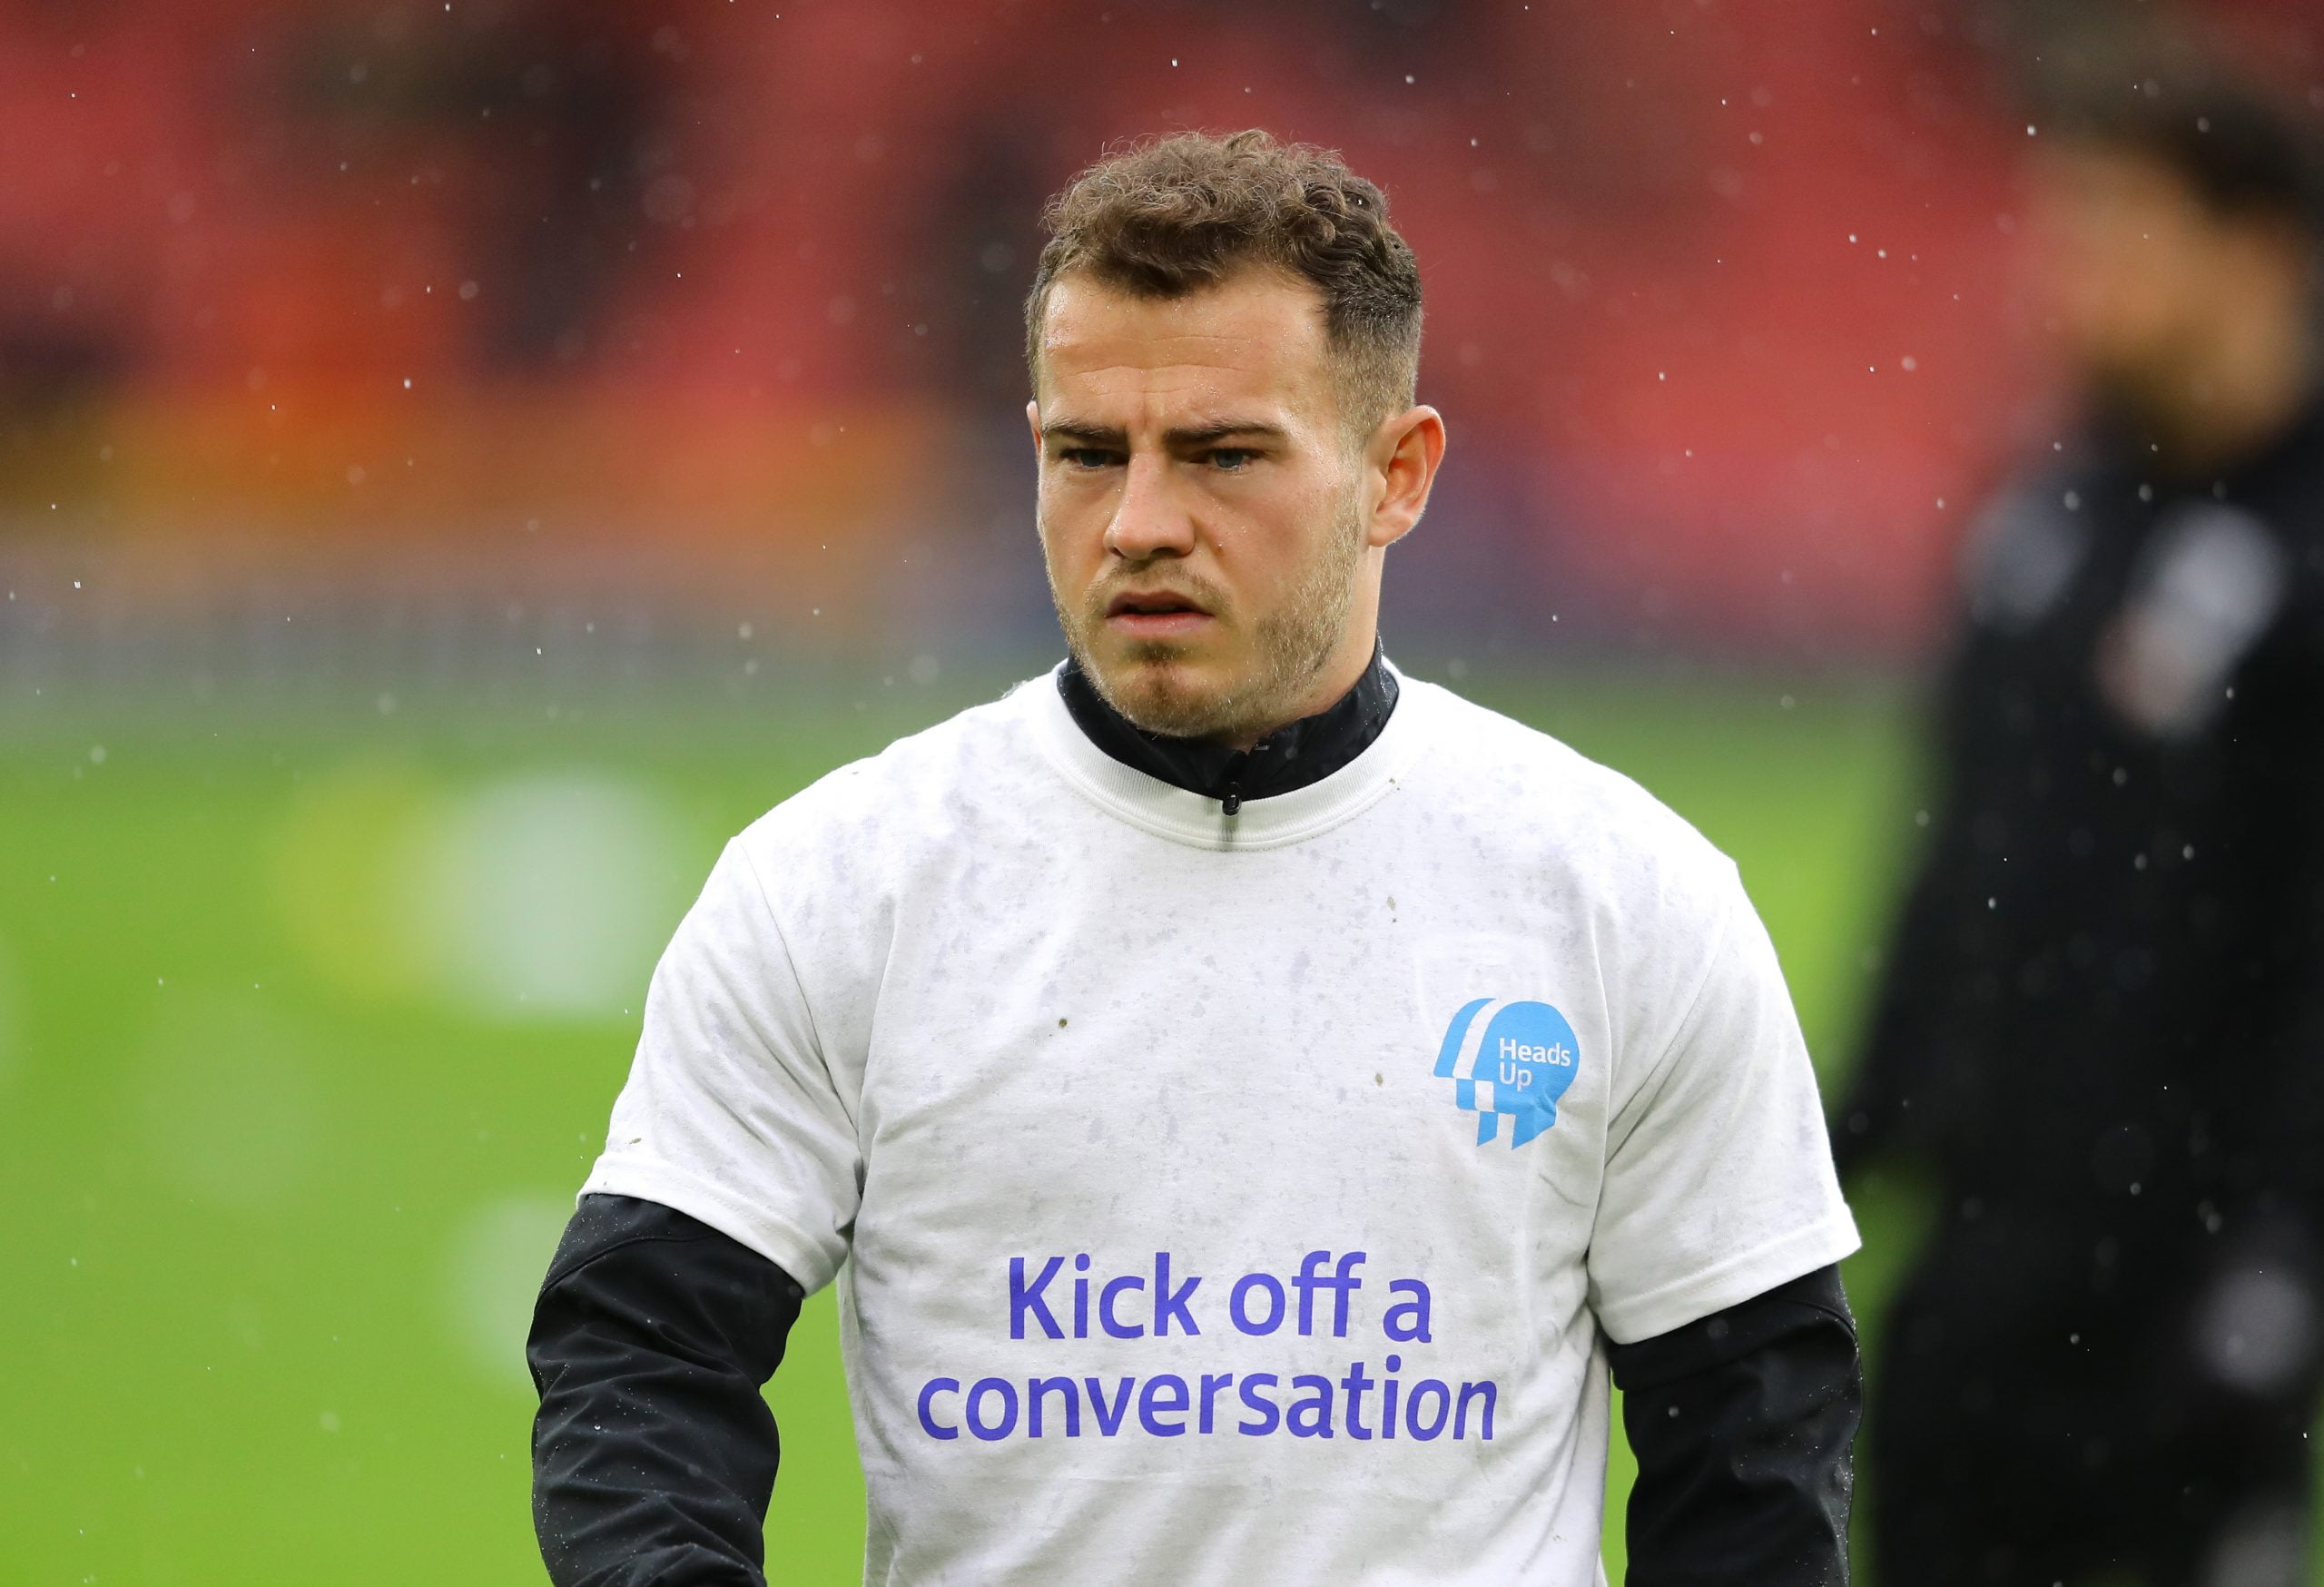 Ryan Fraser of AFC Bournemouth wears a Heads Up campaign T-shirt prior to the Premier League match between Sheffield United and AFC Bournemouth  at Bramall Lane on February 09, 2020 in Sheffield, United Kingdom. (Photo by Richard Heathcote/Getty Images)